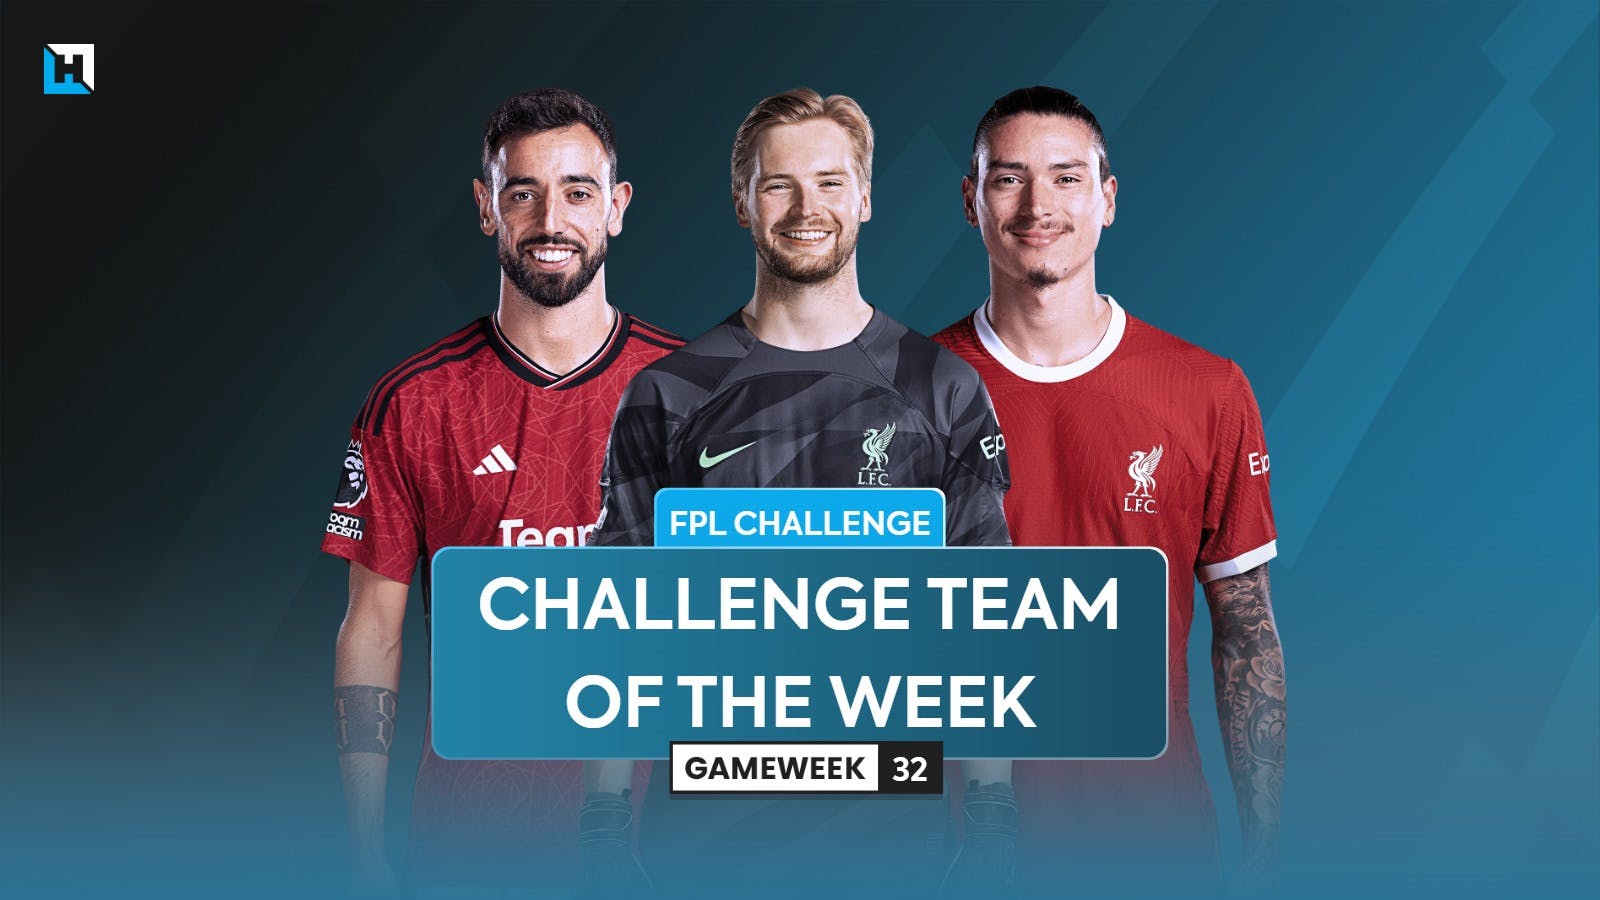 The best FPL Challenge team for Gameweek 32 according to Hub AI